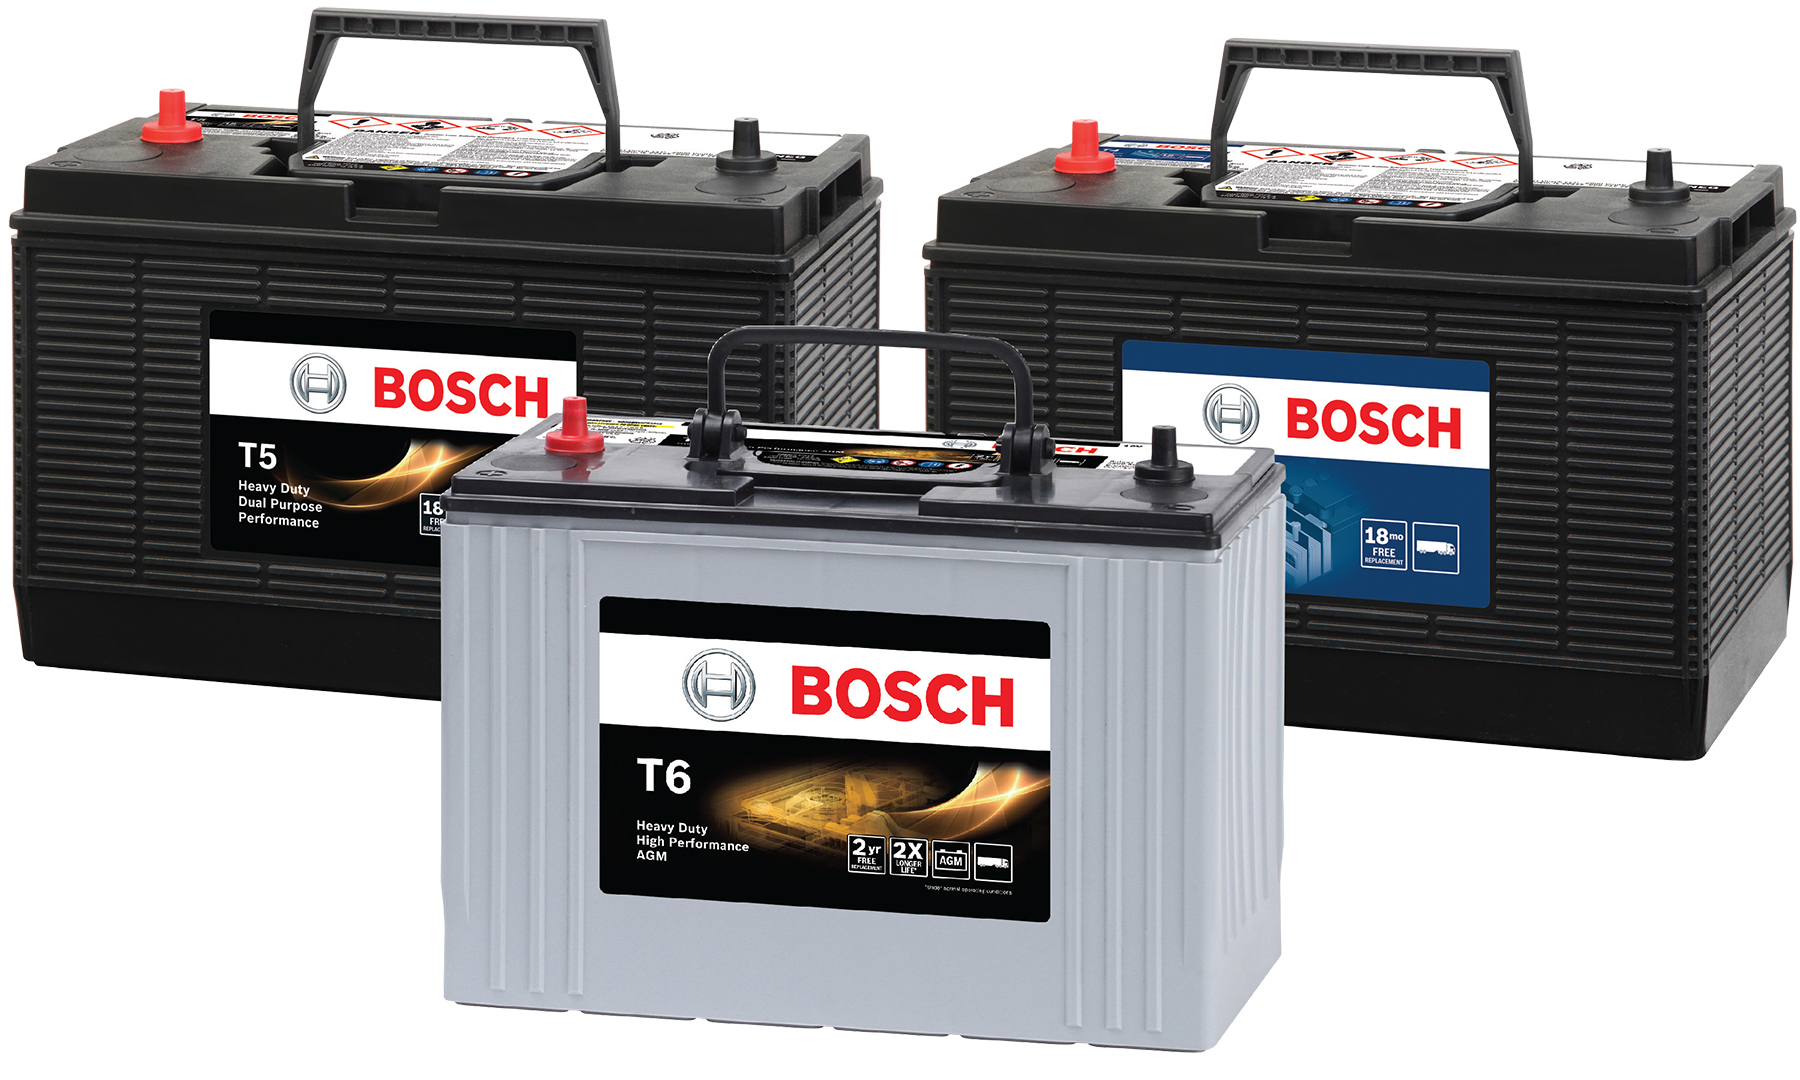 Bosch Expands Aftermarket Product Lines With 34 New Part Numbers